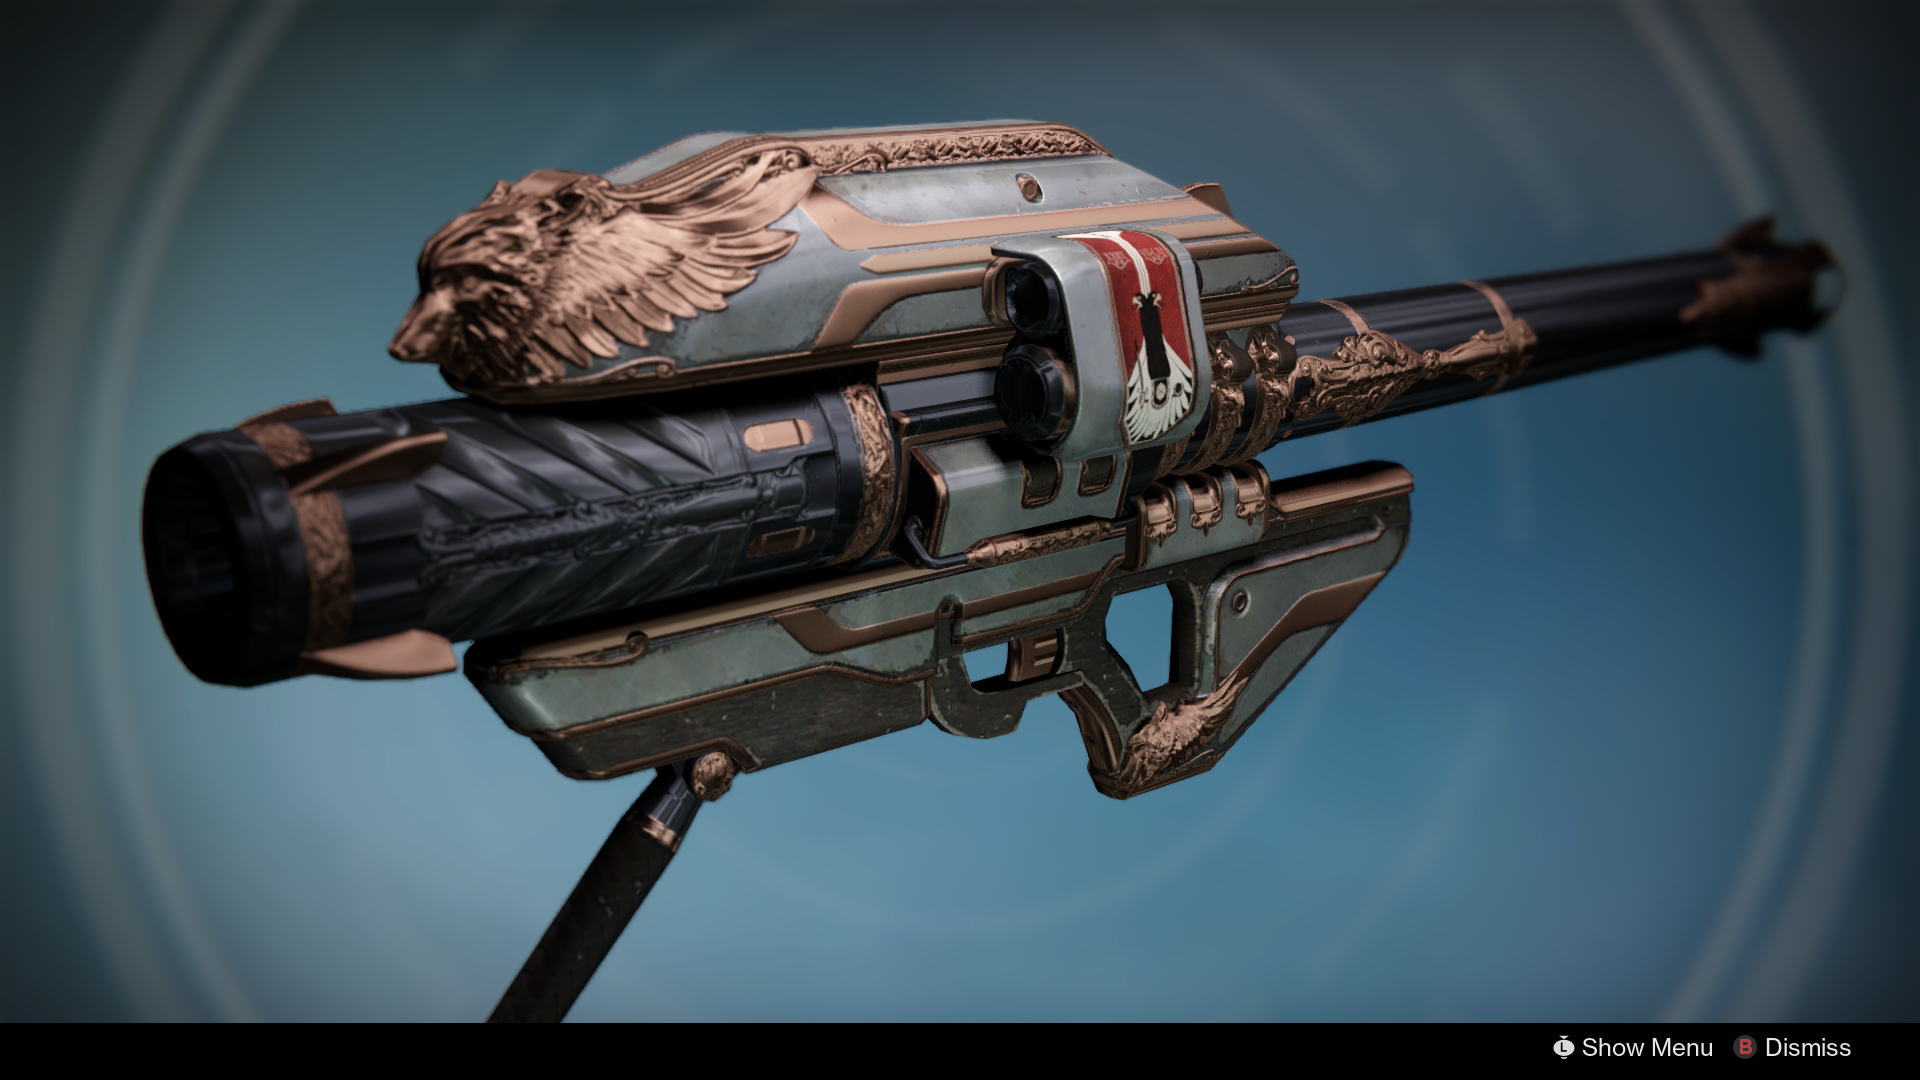 I Got a Destiny 2 Rocket Launcher and It's My Whole Life Now